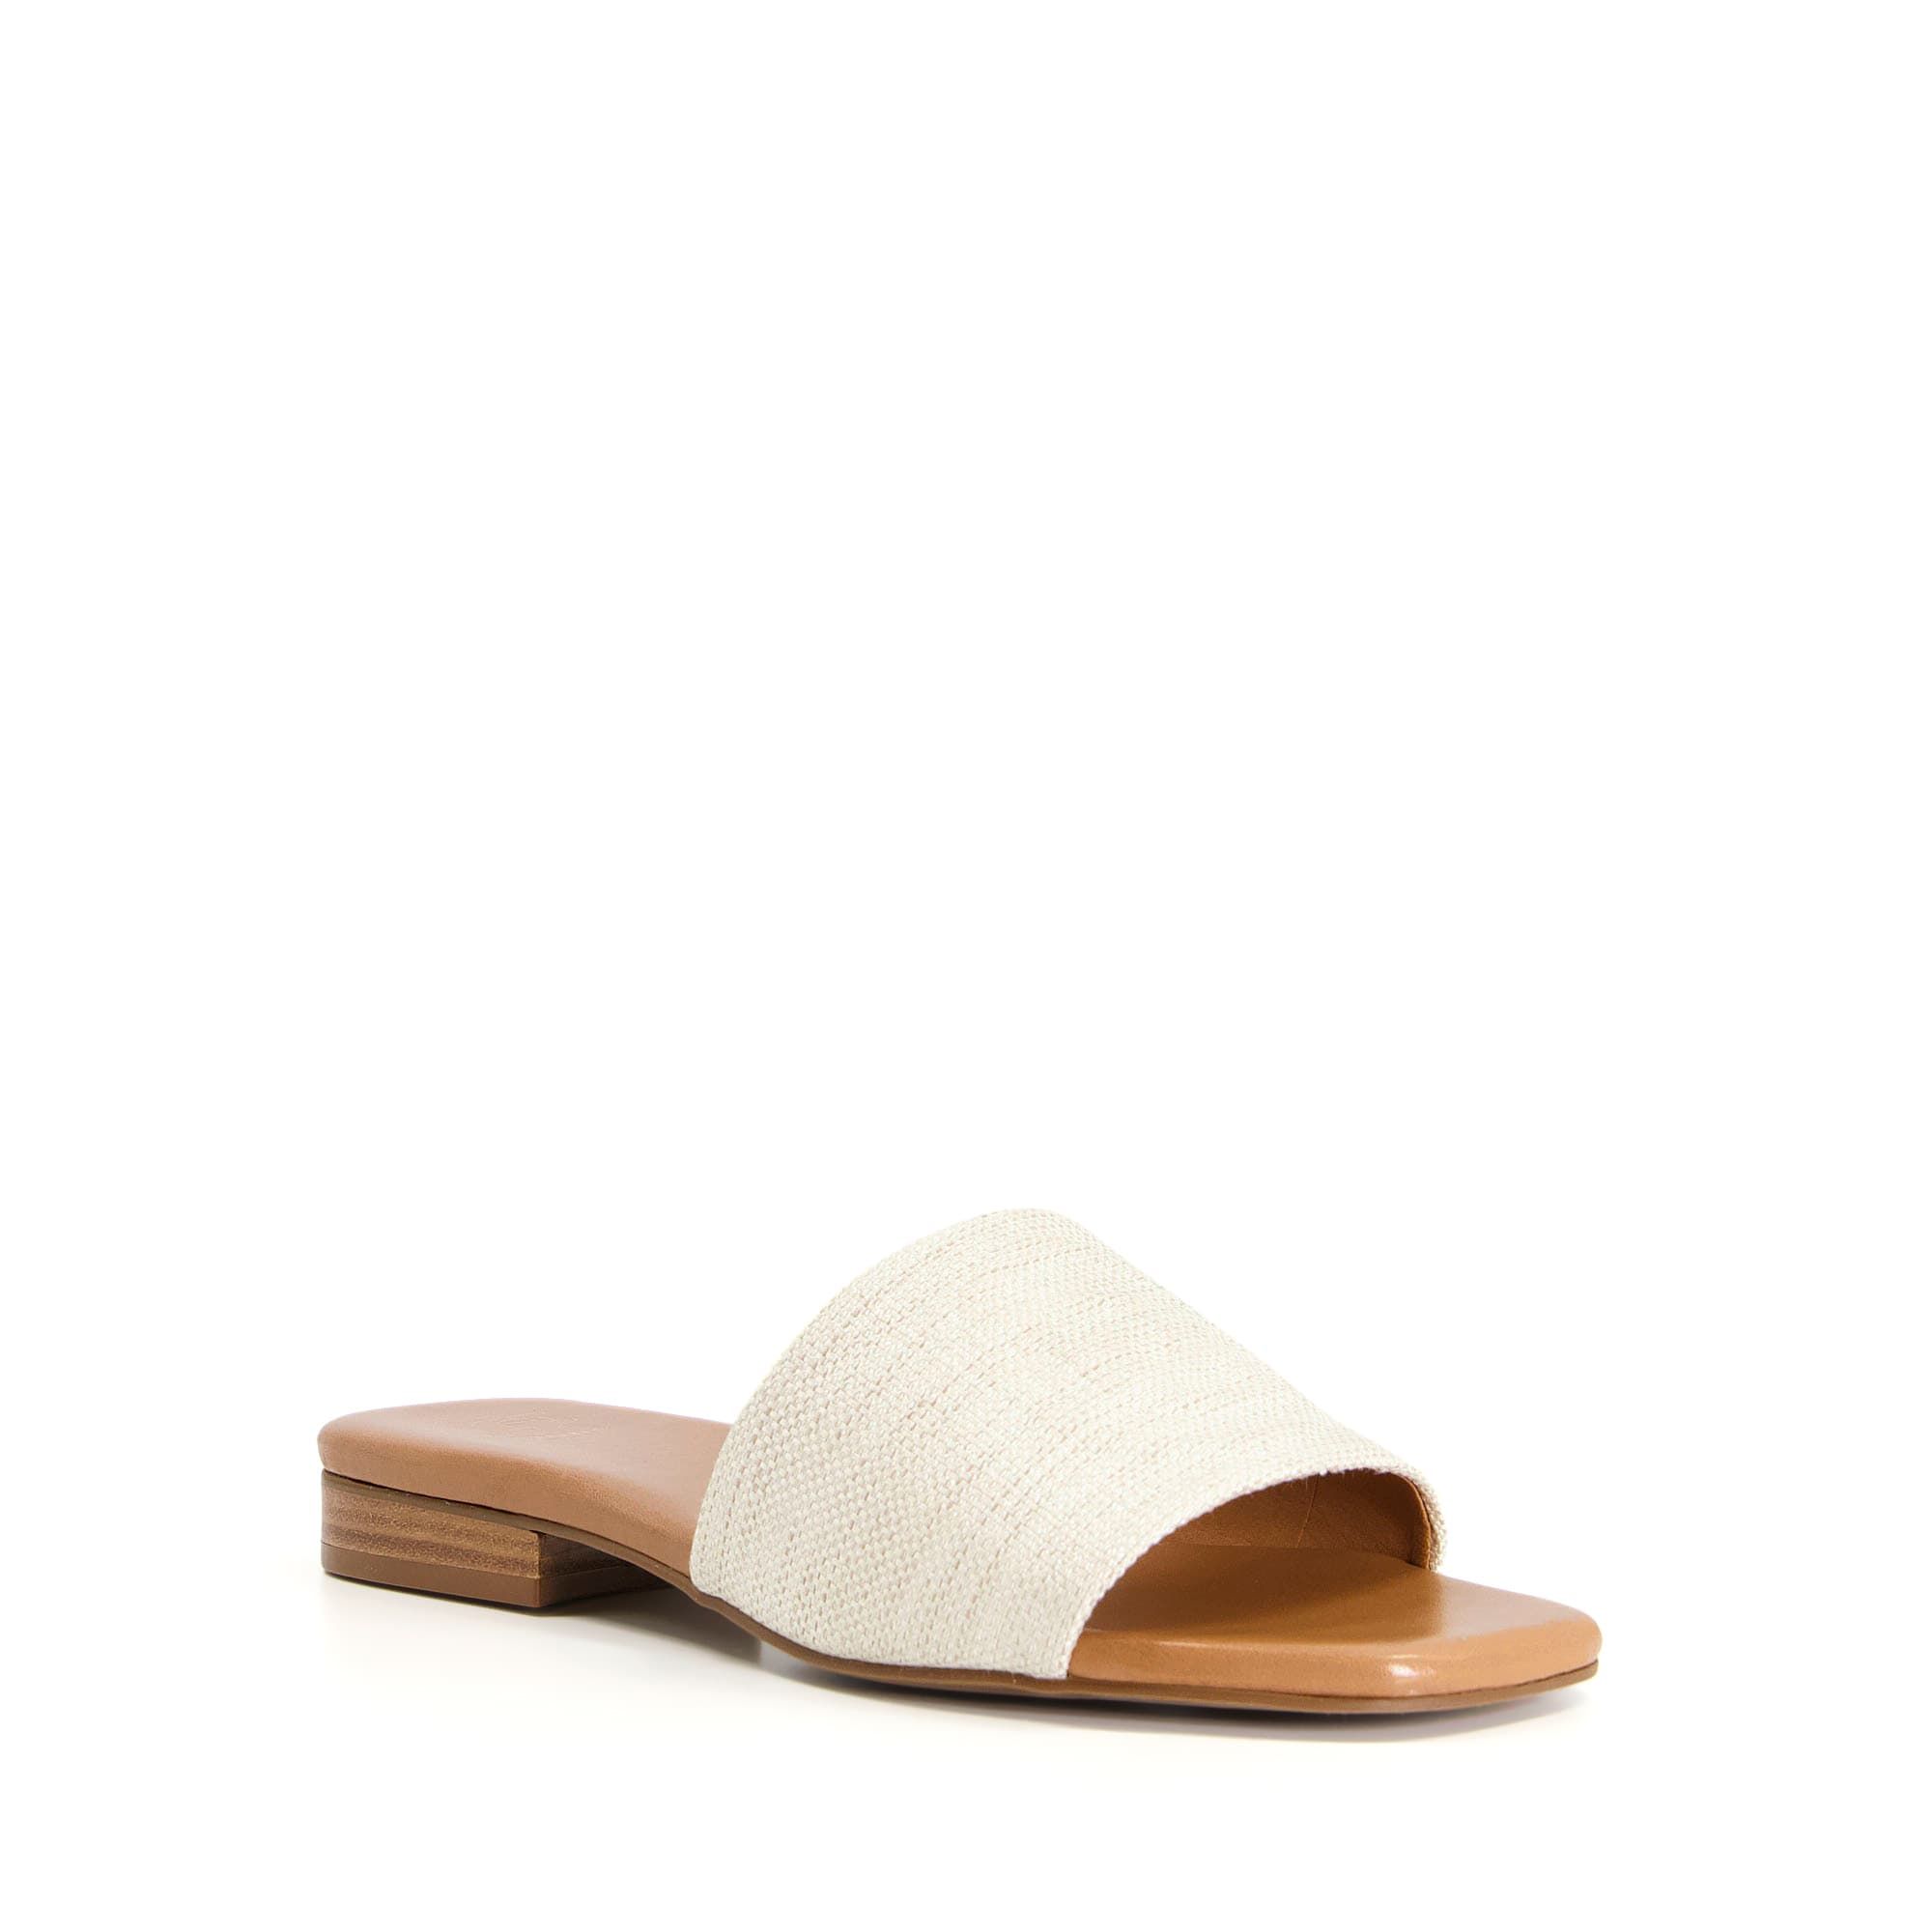 These stylish sliders mean business, with a monogram-embossed strap, an open-square toe and a neutral colour palette. Designed to be worn with anything and everything this summer.